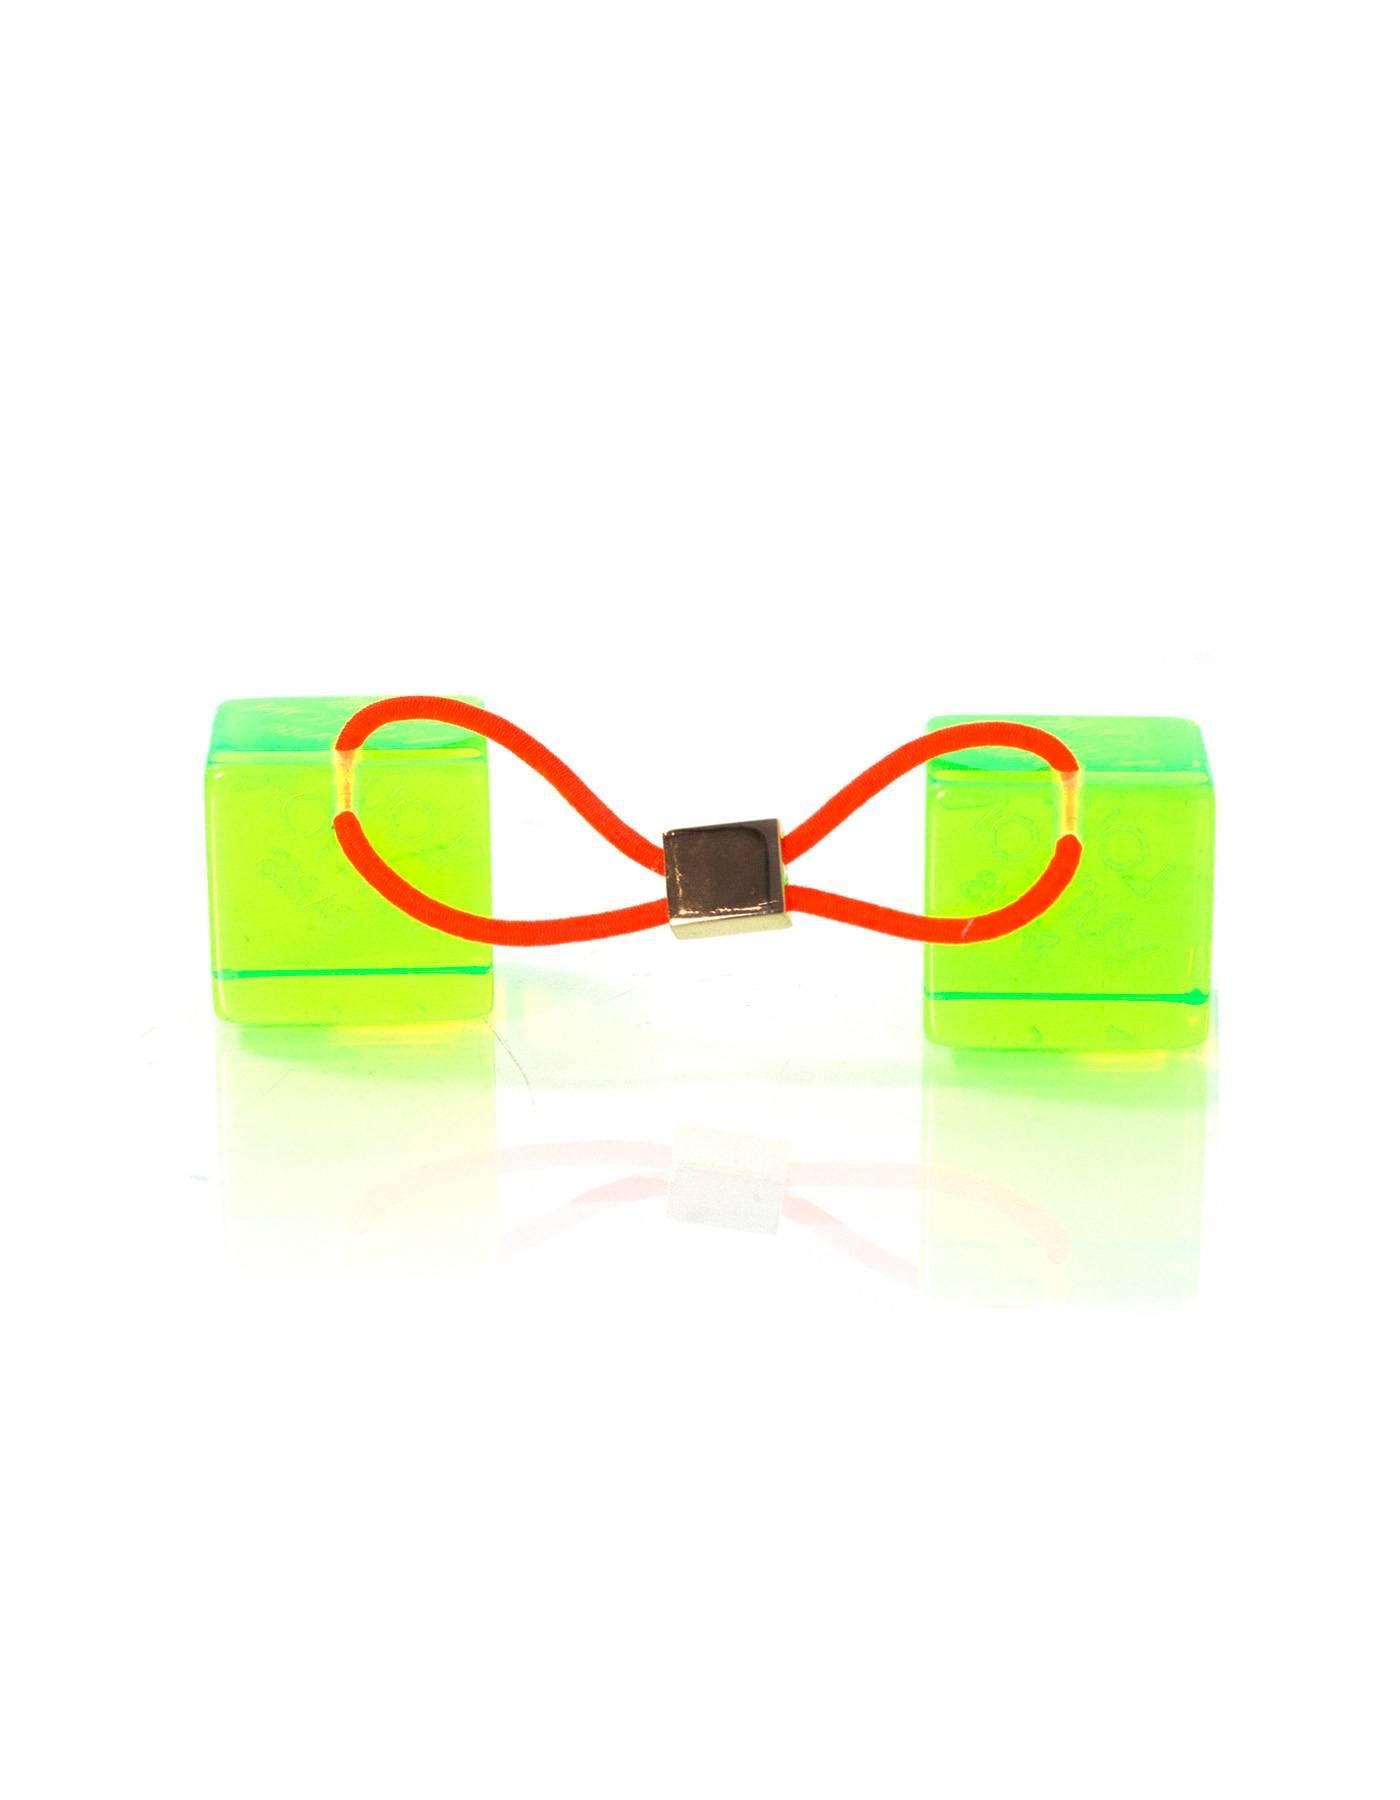 Louis Vuitton Green Hair Cubes

Color: Green
Hardware: Goldtone
Materials: Lucite, brass, elasticized band
Retail Price: $295 + tax
Overall Condition: Excellent pre-owned condition with the exception of some surface marks

Measurements: 
1"L x